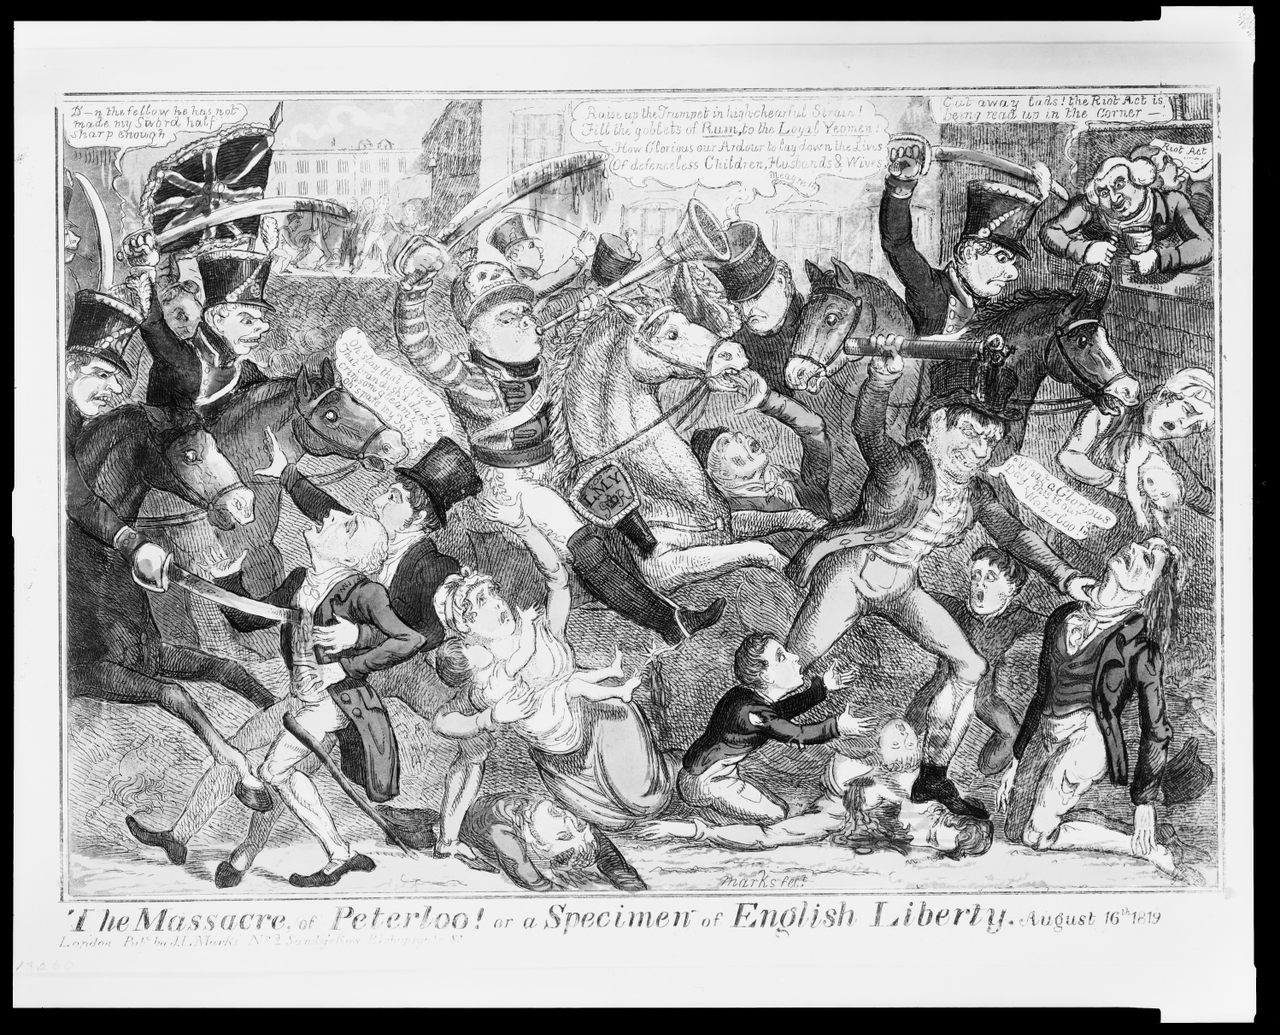 This print depicts the Peterloo Massacre, which took place in Manchester, England, in 1819. As the cavalry rides into the crowd, killing 15, someone reads the Riot Act (top right).
